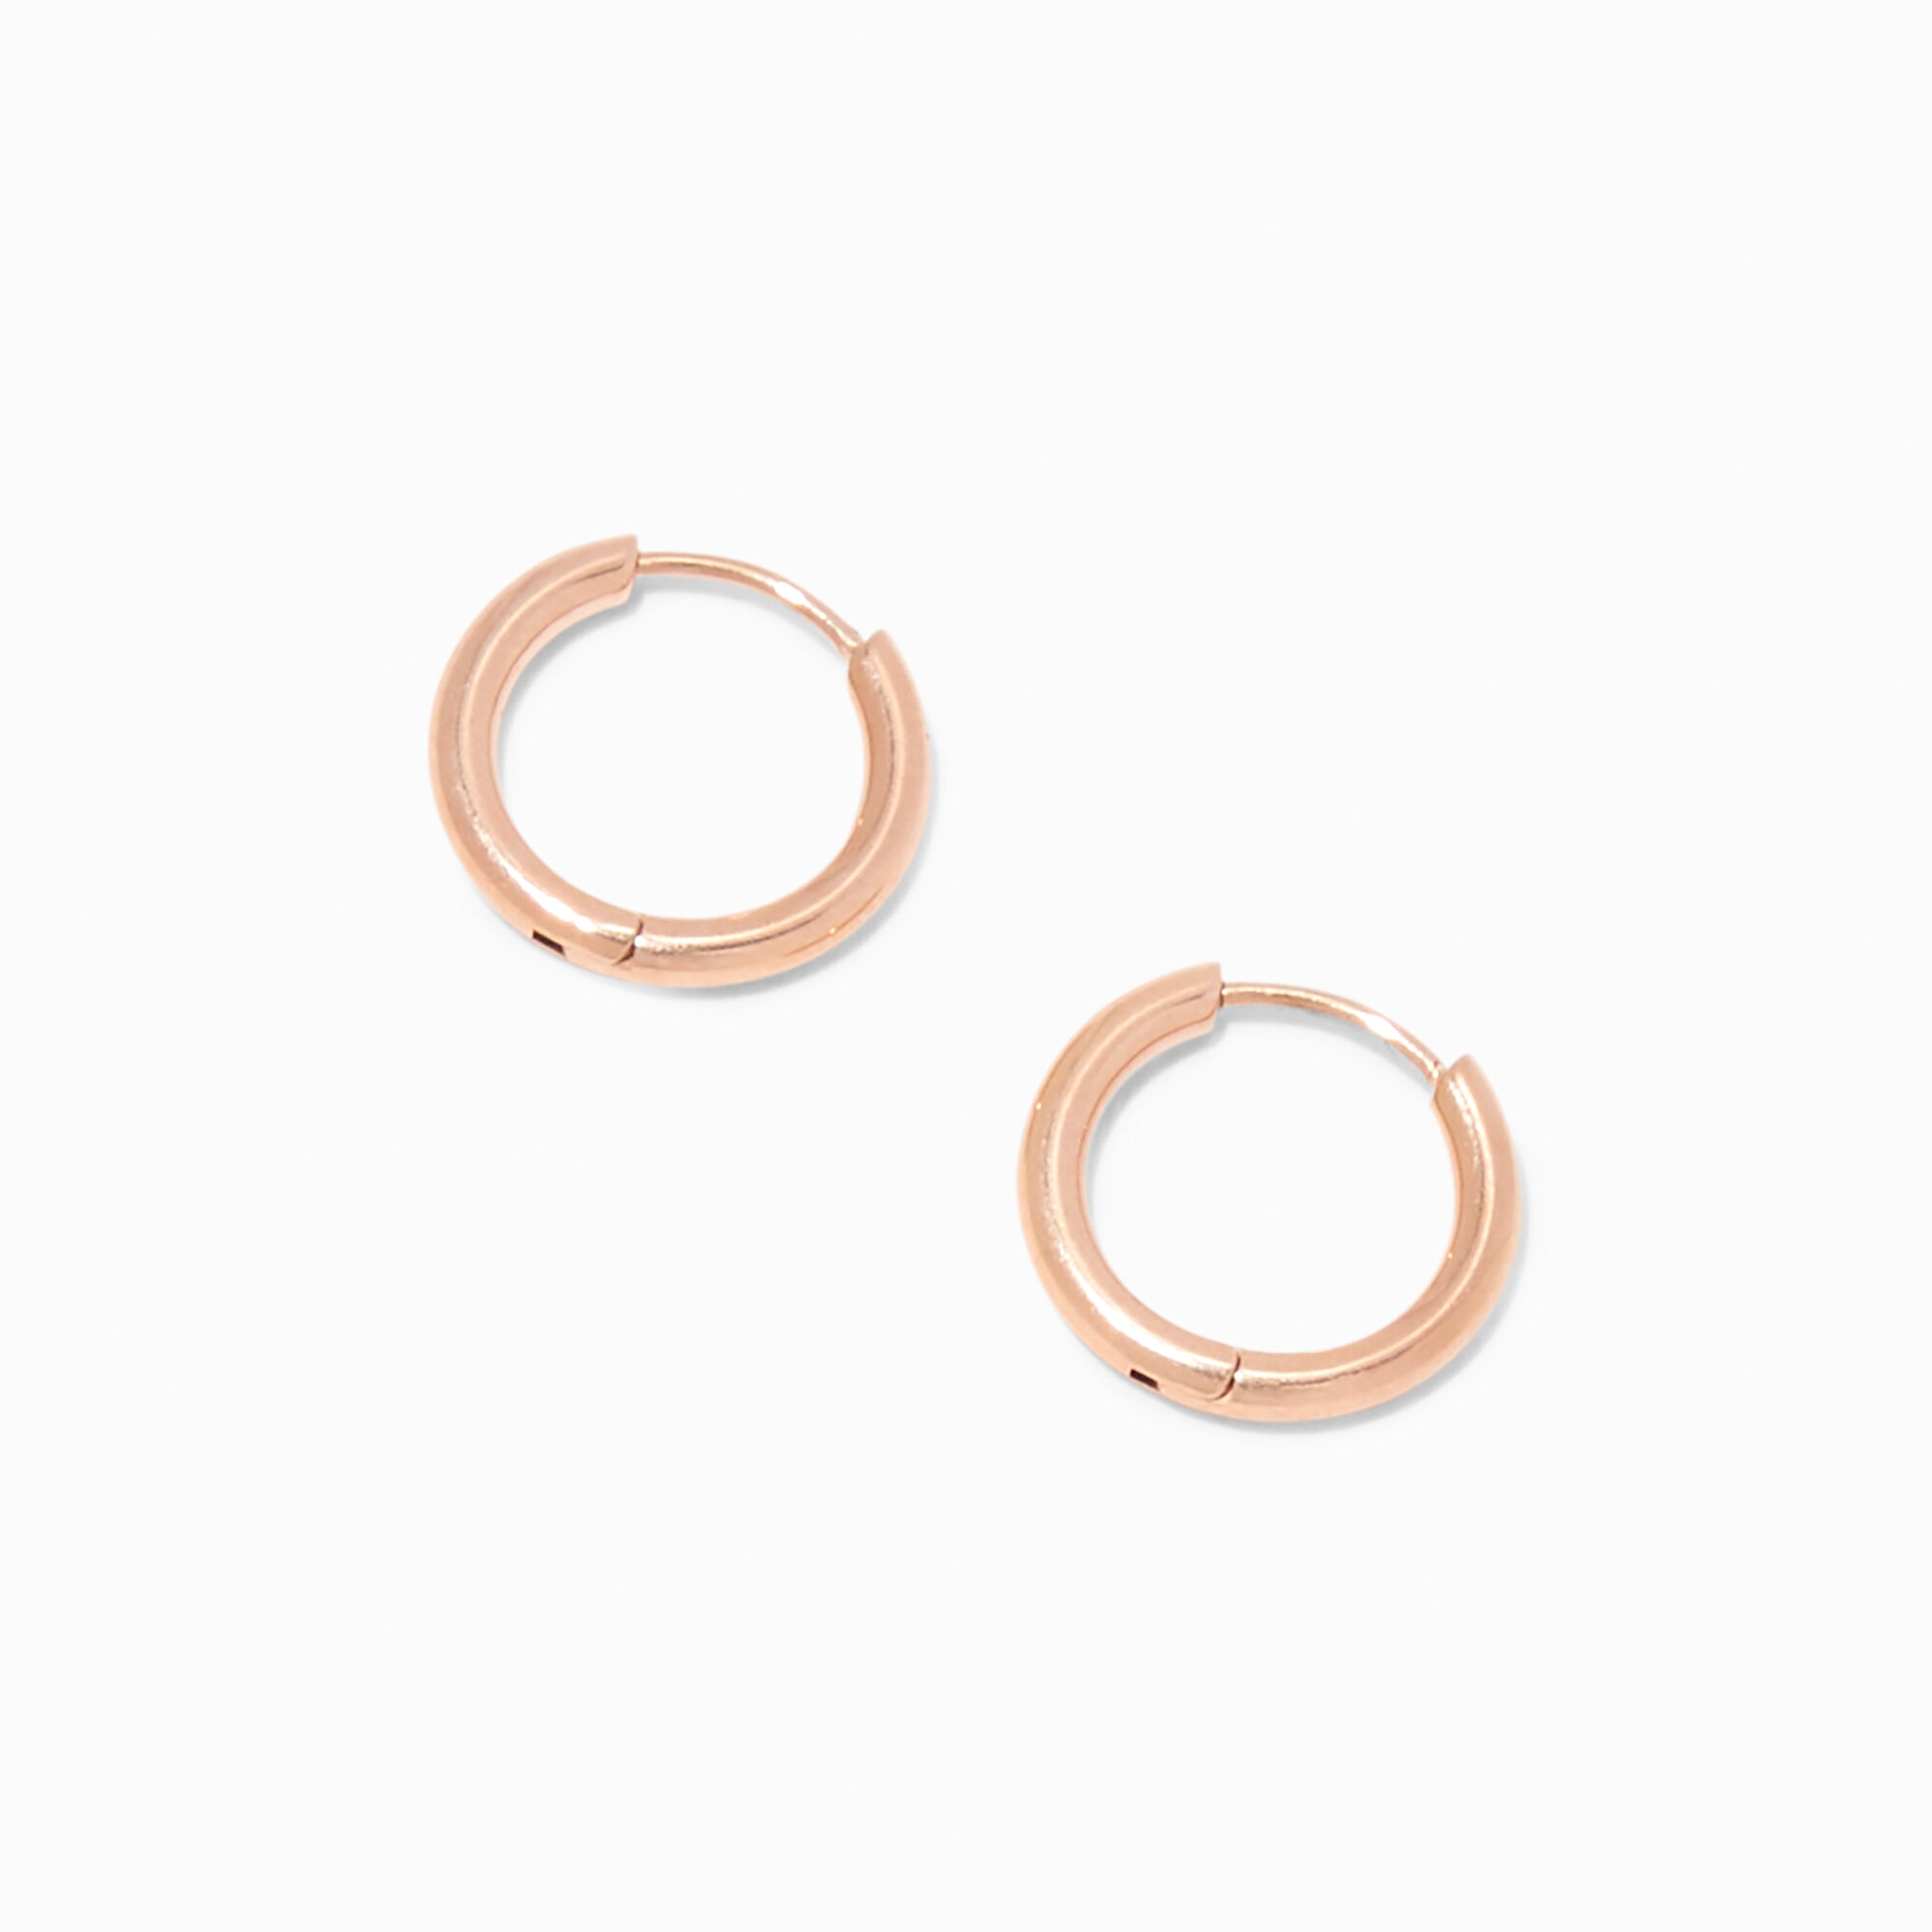 View C Luxe By Claires Rose Titanium 10MM Tube Hoop Earrings Gold information